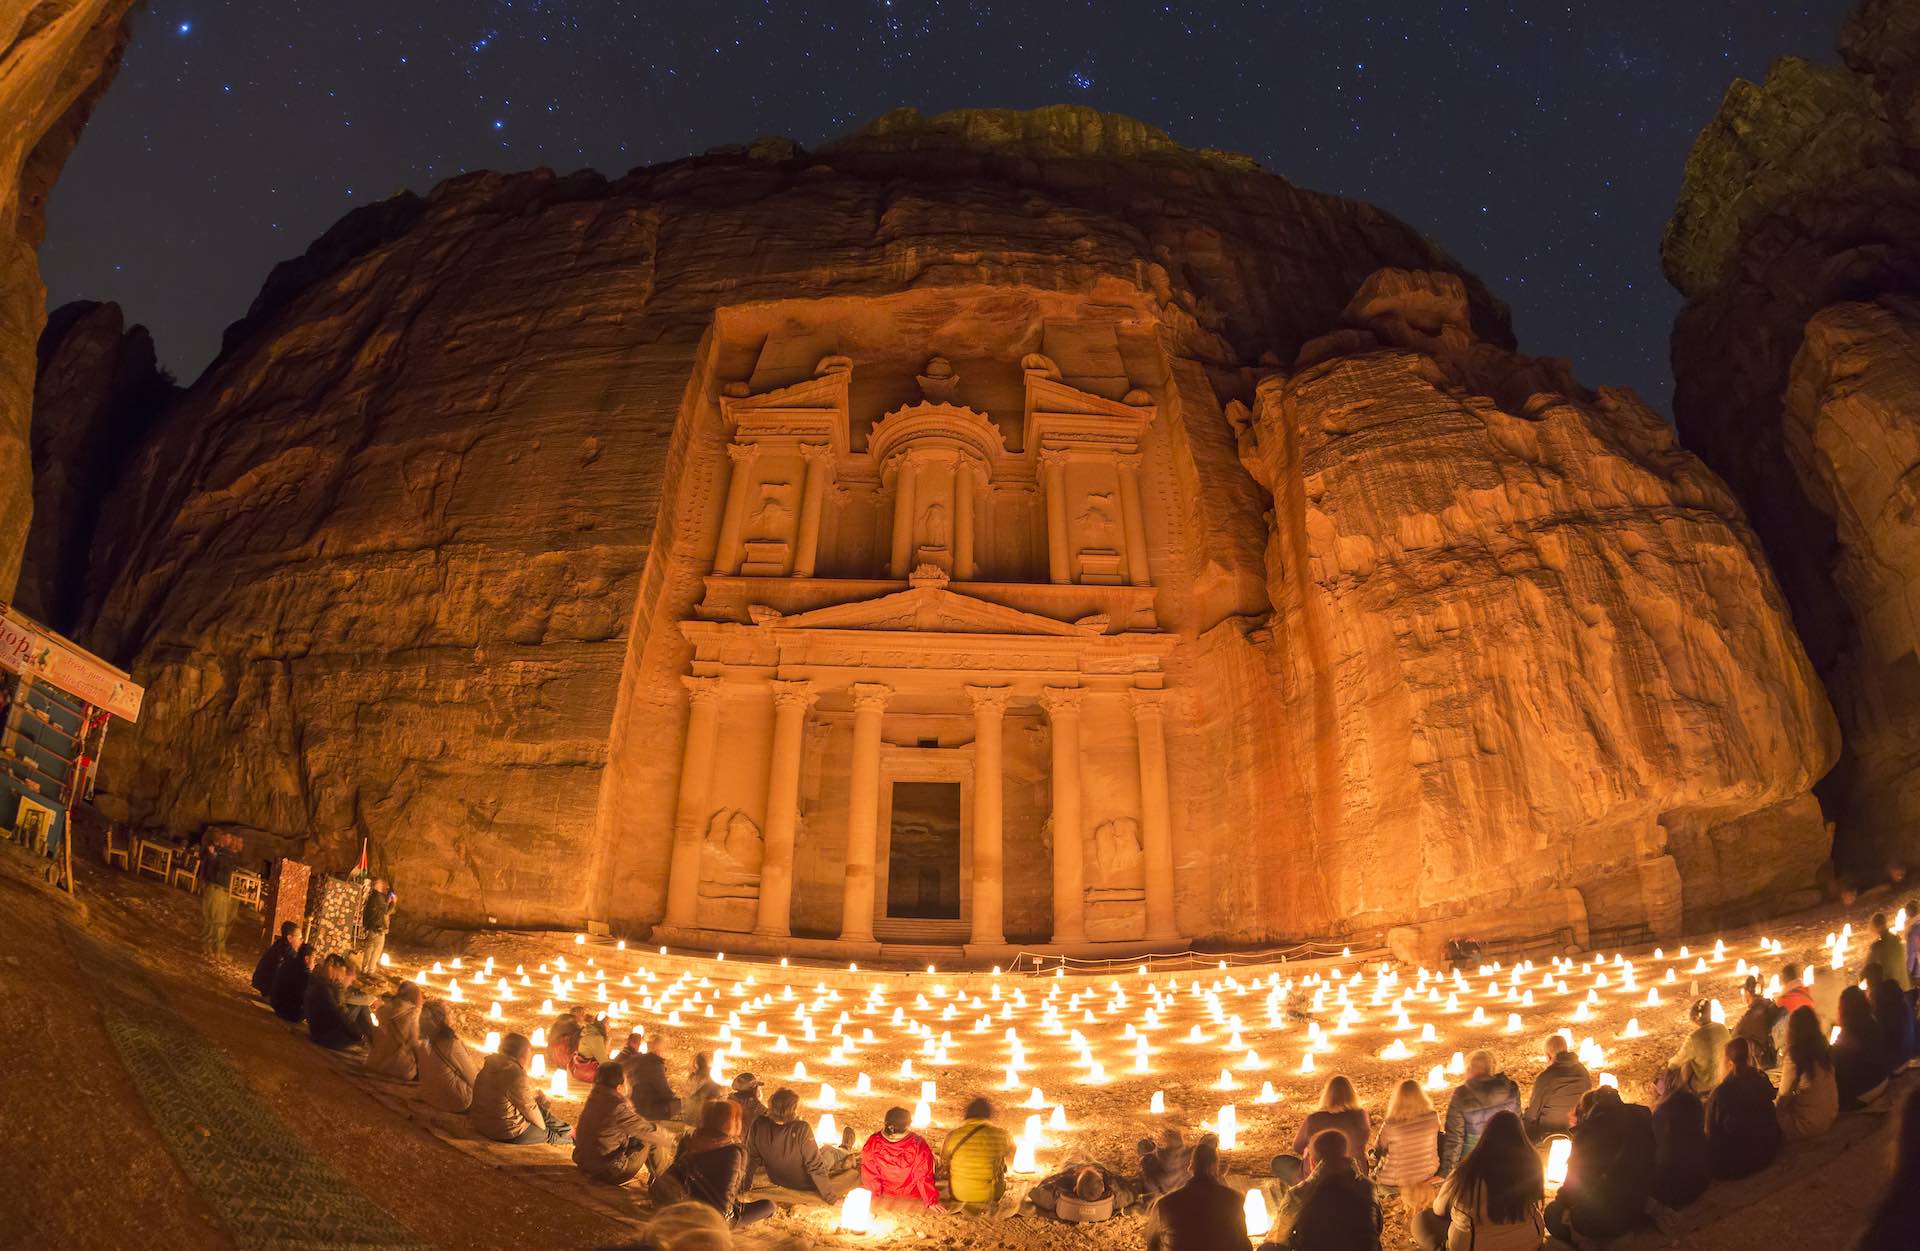 Visitors to Petra are at their highest level since the pandemic